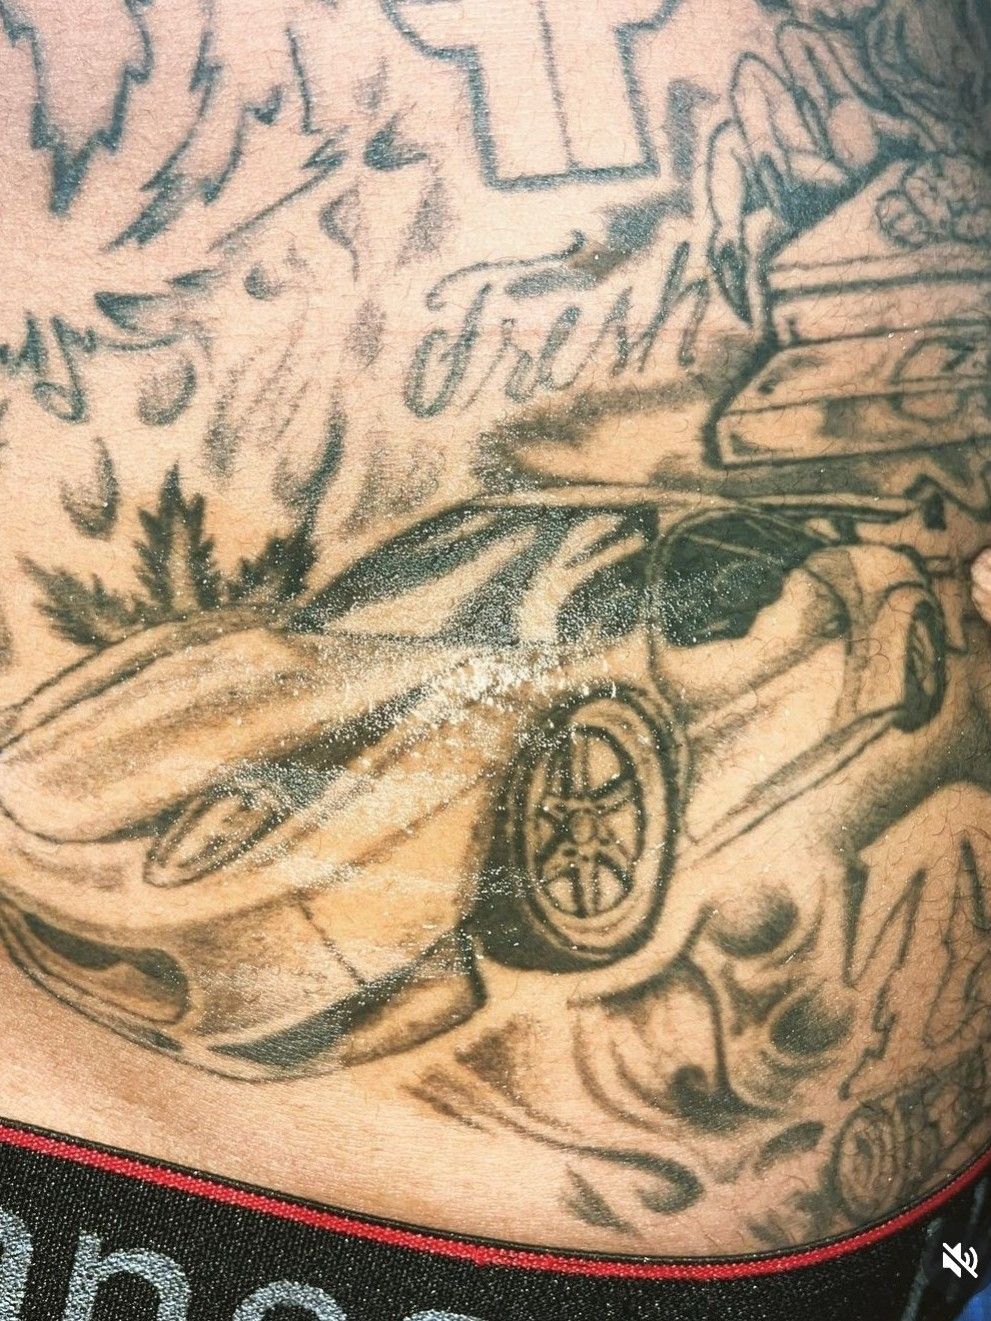 Got this tattoo as motivation to get another FC. : r/initiald